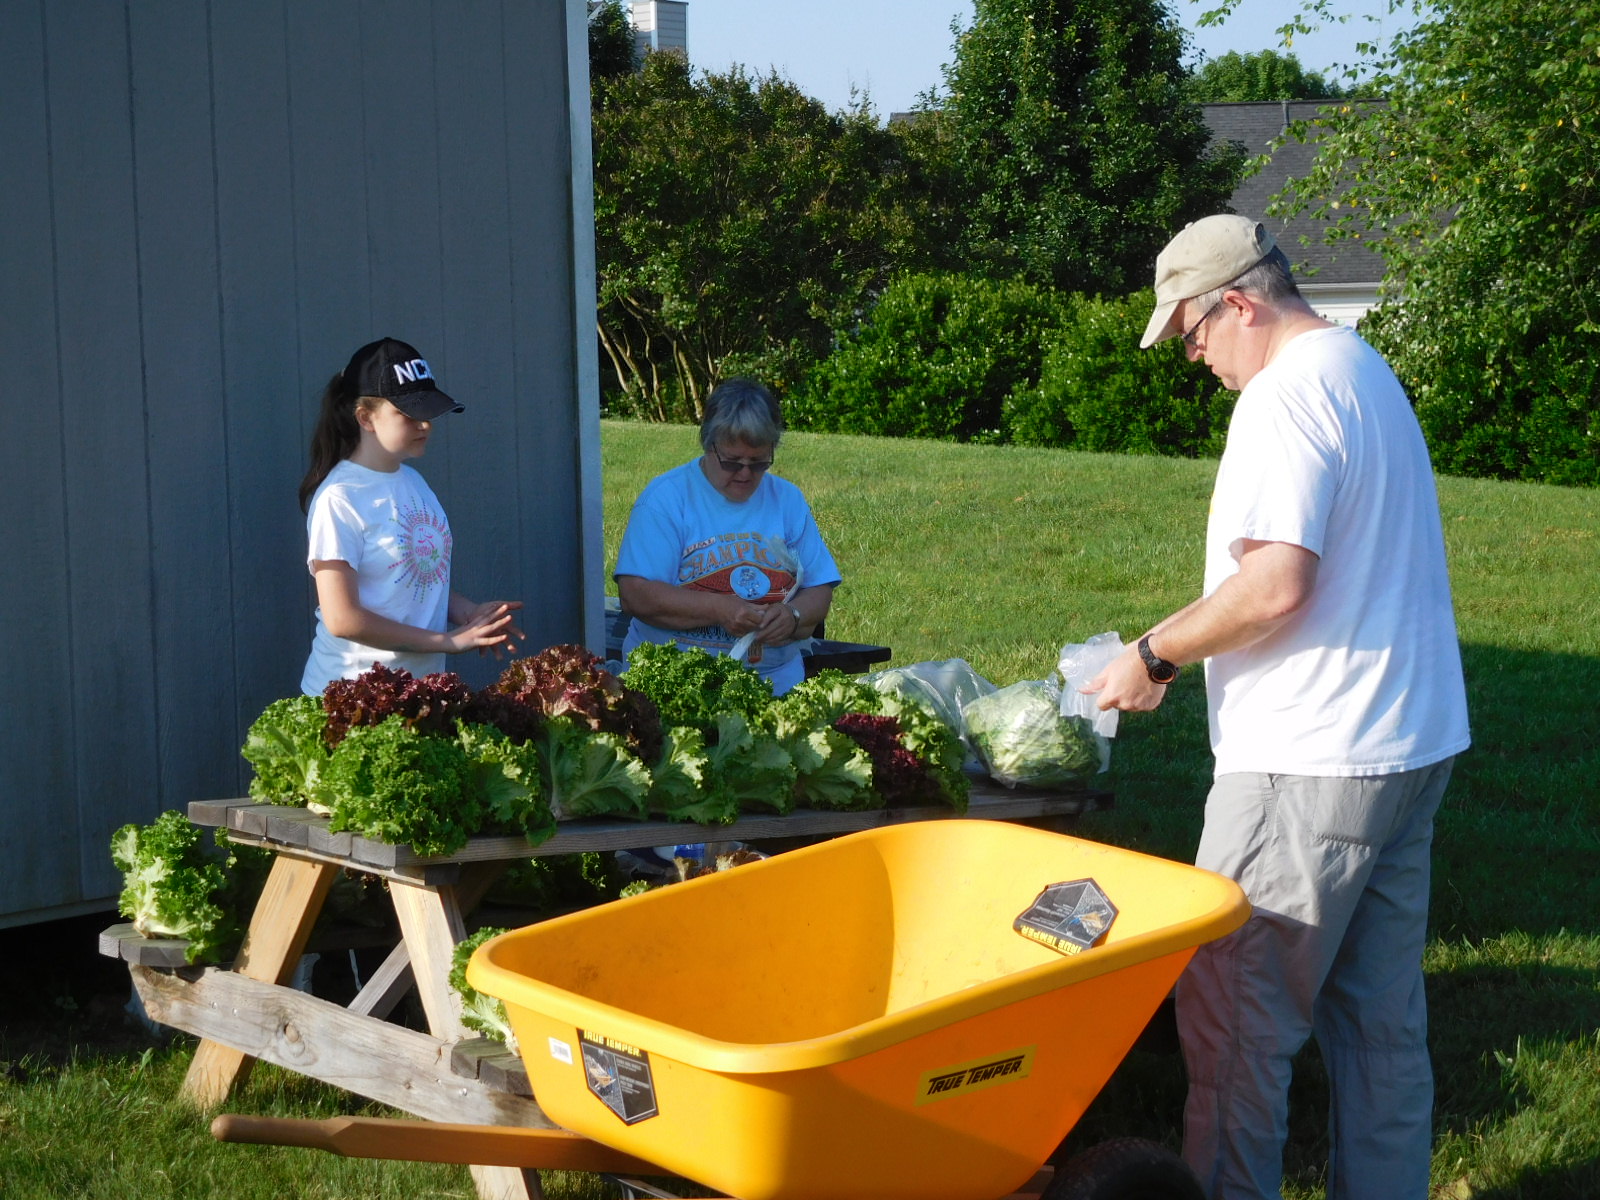 Spring Share the Harvest Farm Workday: Small But Successful !